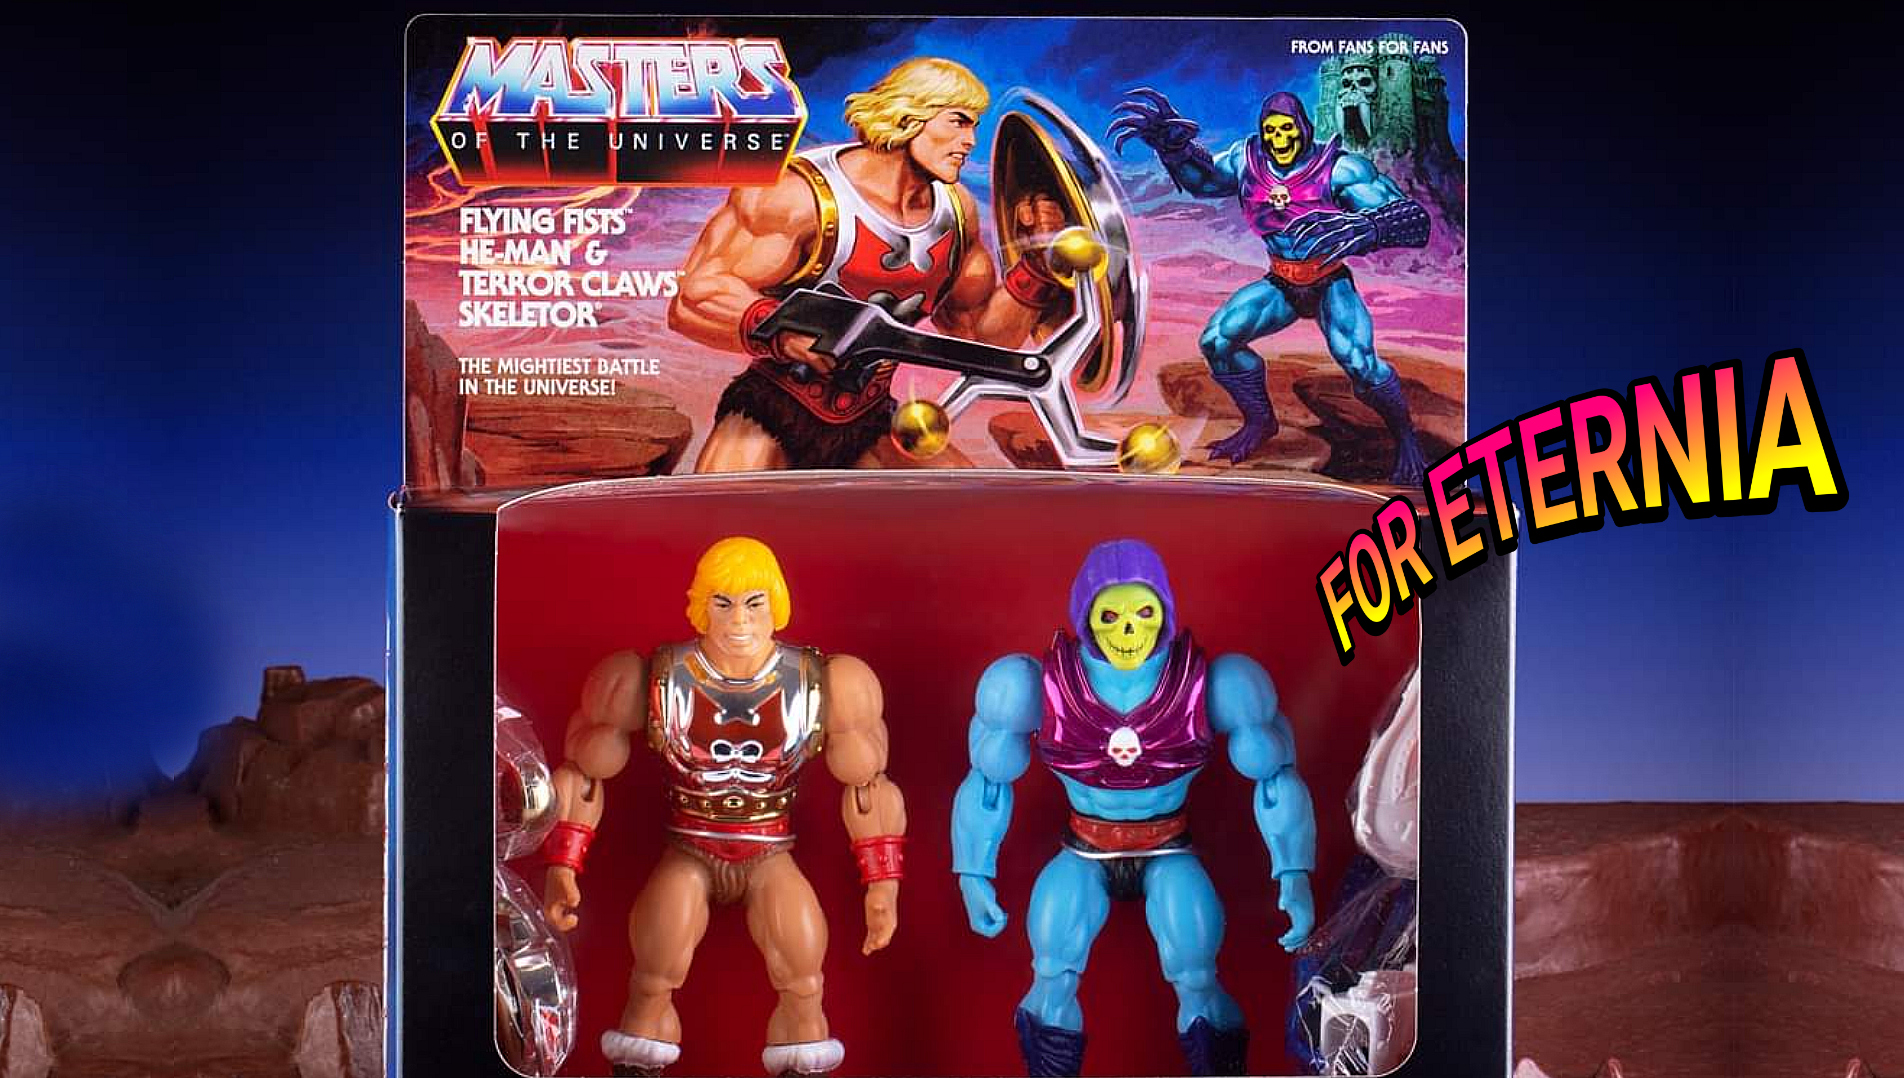 Exclusive TOYPLOSION Flying Fists He-Man & Terror Claws Skeletor Origins 2-pack and print announced